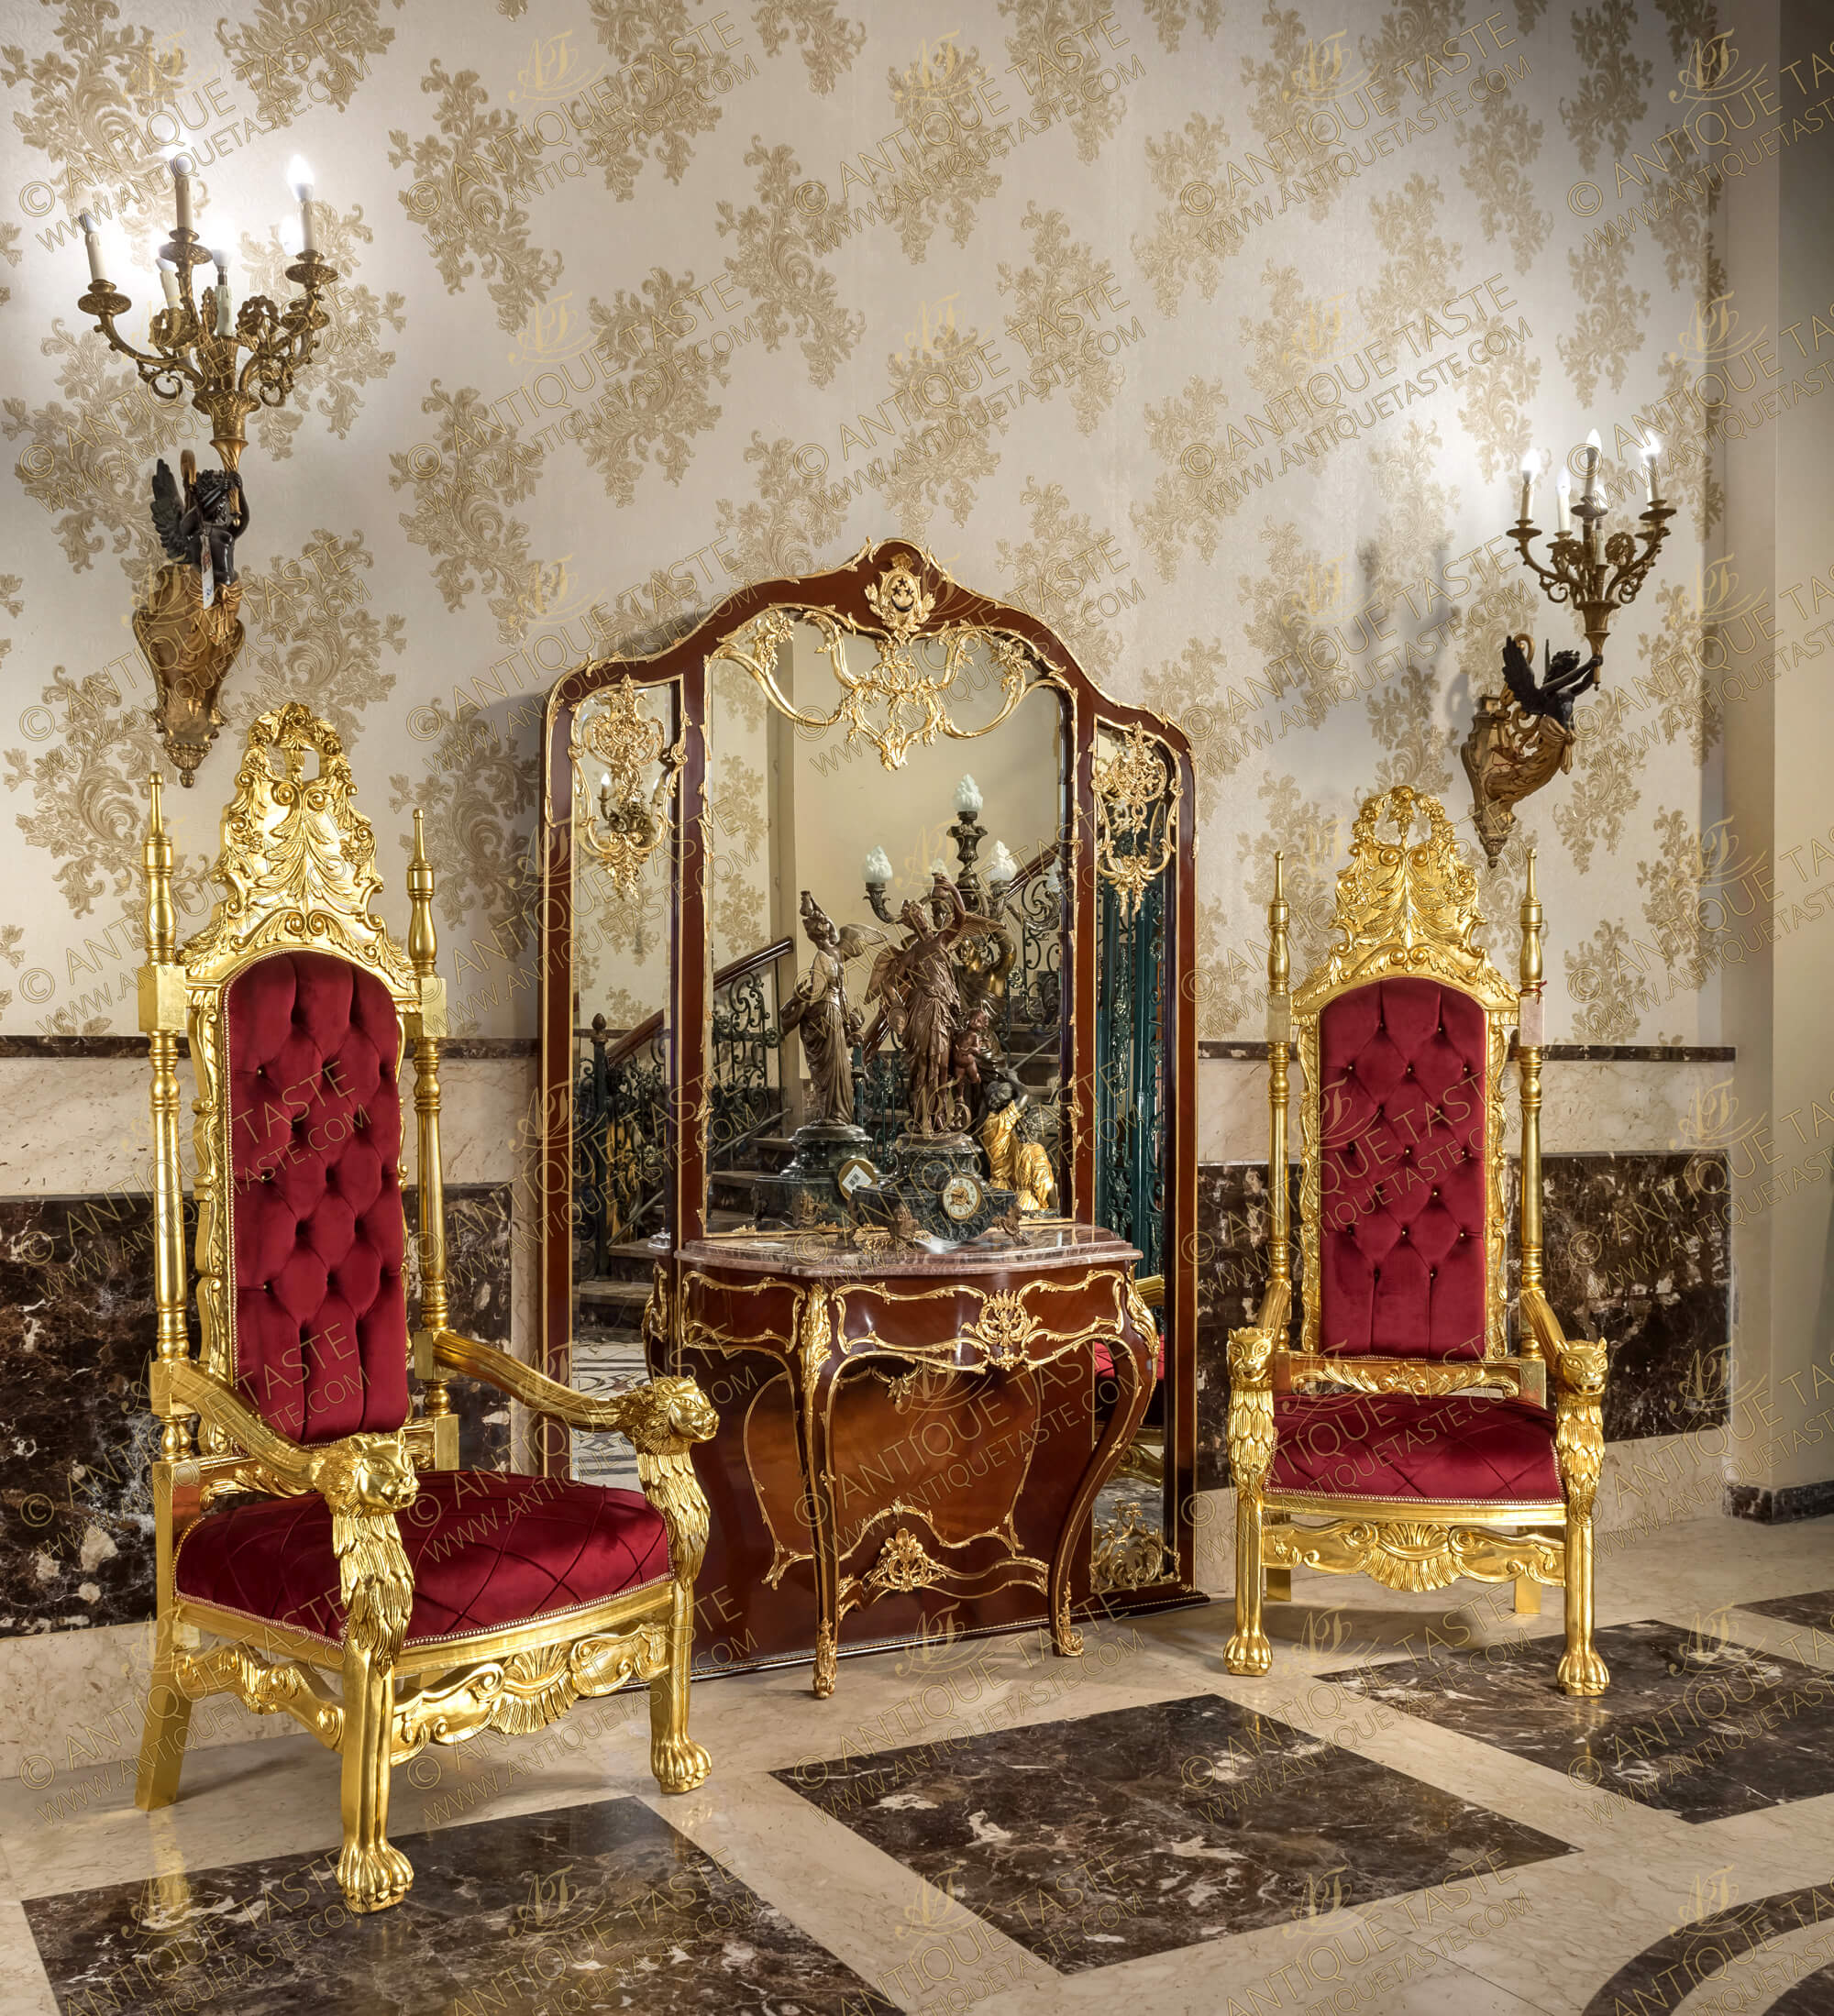 A marvelous Francois Linke Rococo Louis XV style ormolu-mounted Entrance Console Table with a beveled serpentine marble top and grand back wall mirror in three sections, the whole piece is extensively ornamented with foliate ormolu, acanthus leaves and handsome filet; the cabriole legs are connected with elegant S shape stretcher to the wooden back with fine ormolu Rococo motifs